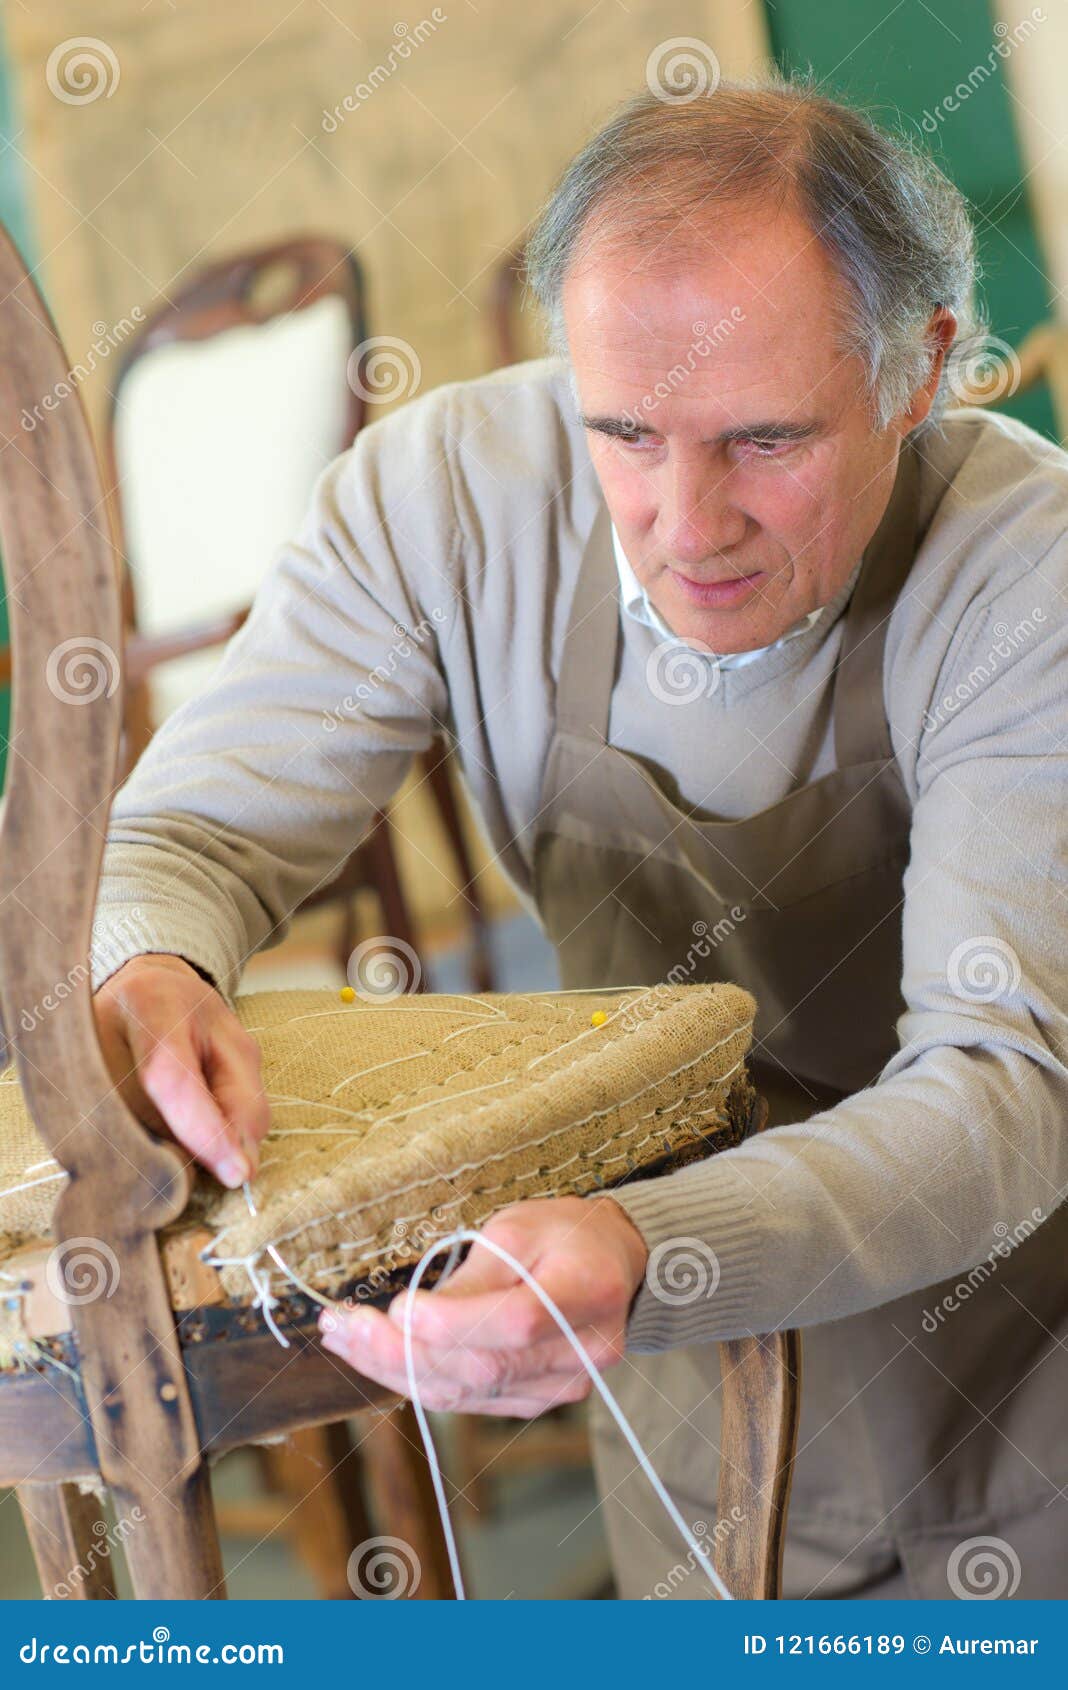 Craftsman Fixing A Chair Stock Image Image Of Injury 121666189